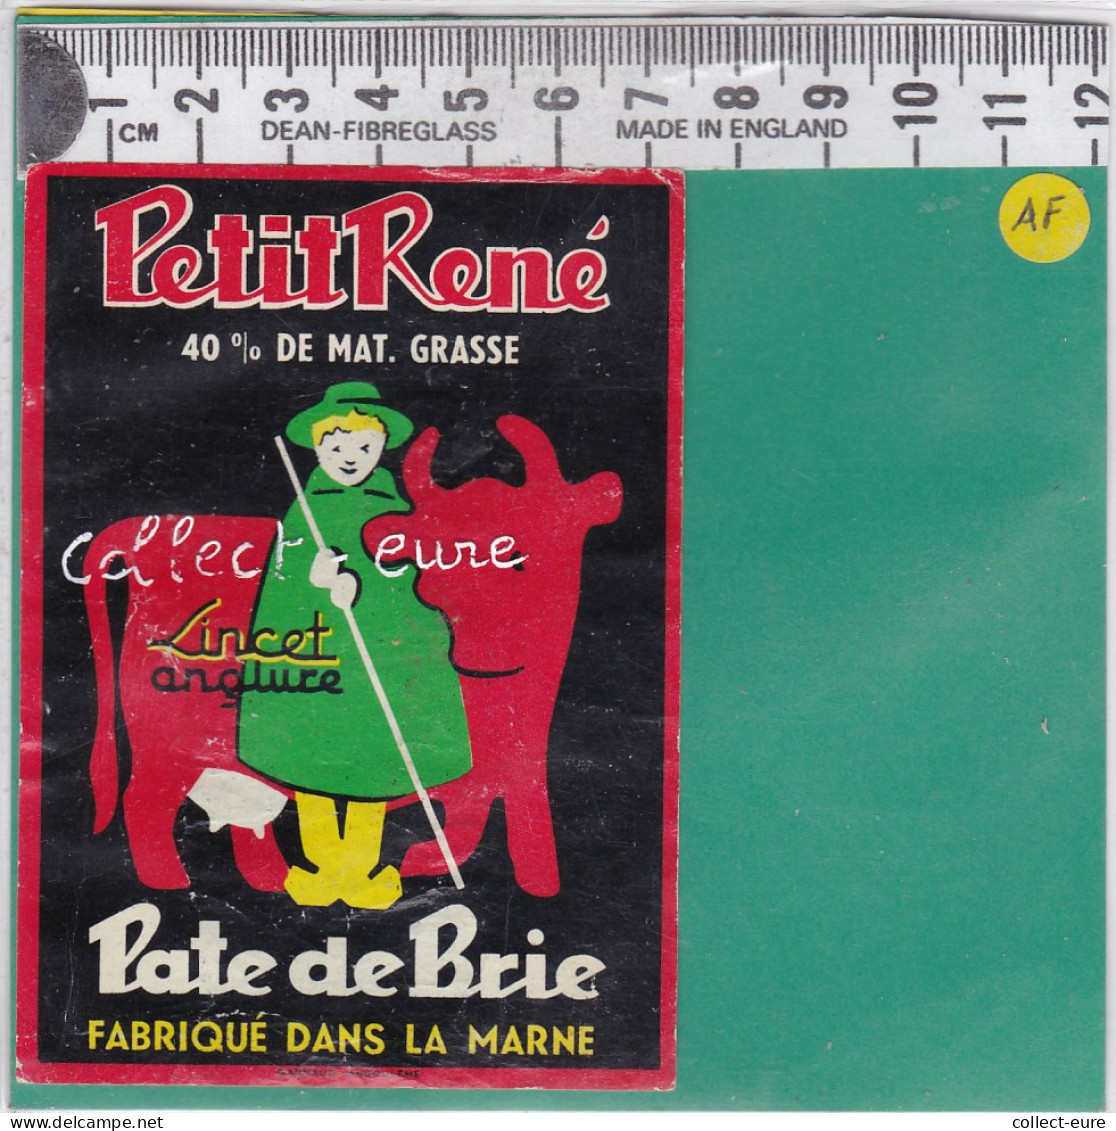 C1219 FROMAGE PATE DE BRIE LINCET ANGLURE  MARNE 40 % LE PETIT RENE - Cheese